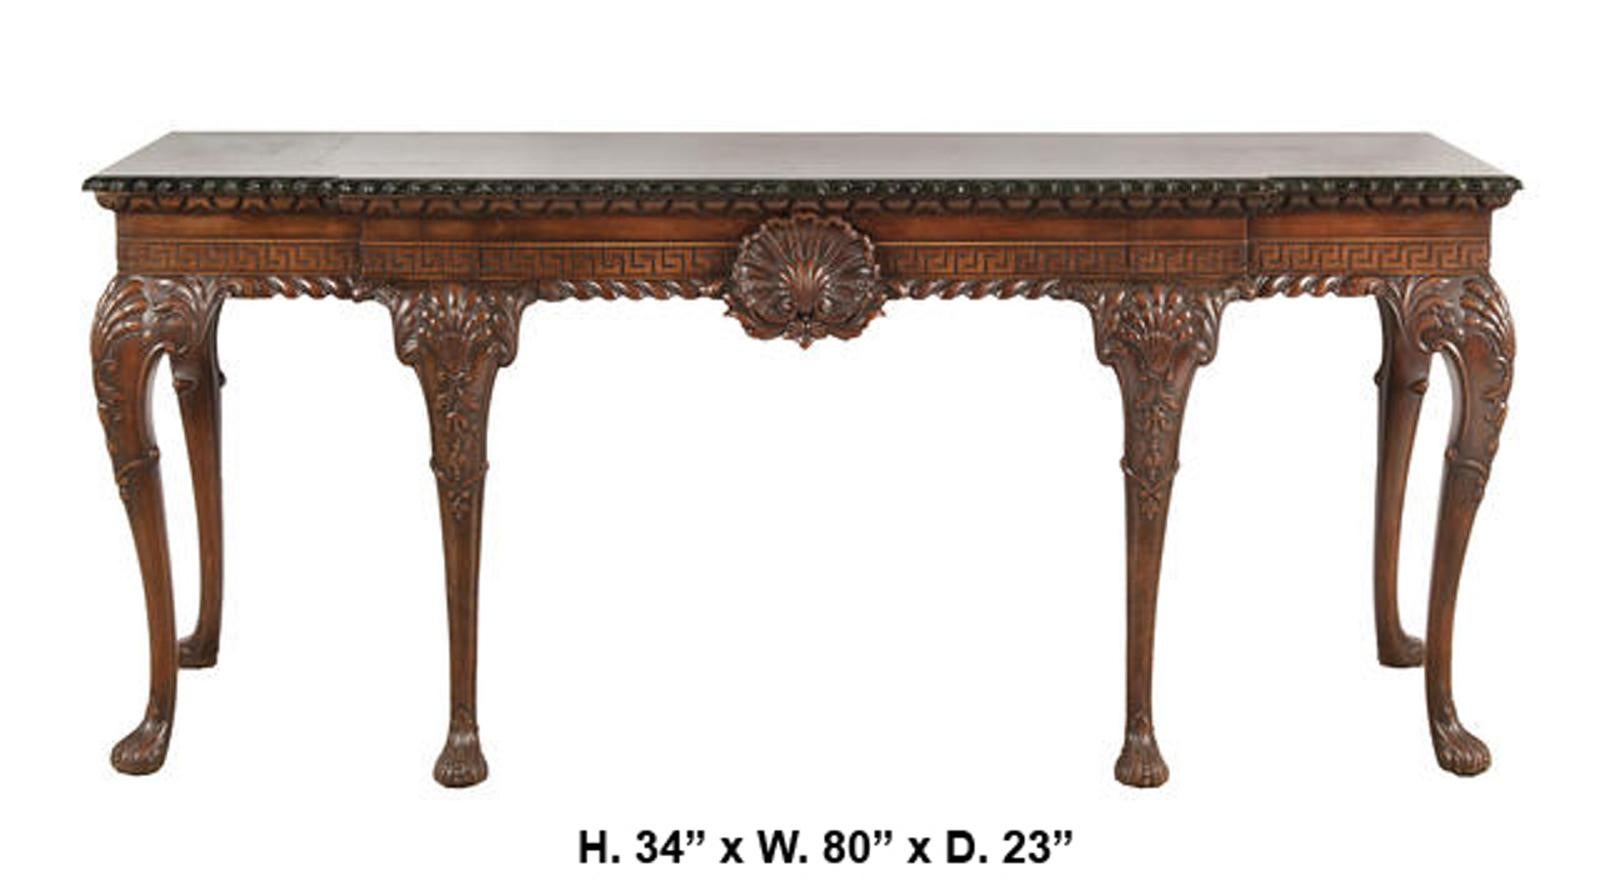 Imposing 19th century English George II style carved mahogany console.
Moulded large green marble top over a conforming breakfront frieze fitted with three drawers decorated with Greek Key and centered by a finely hand carved ornamental shell,